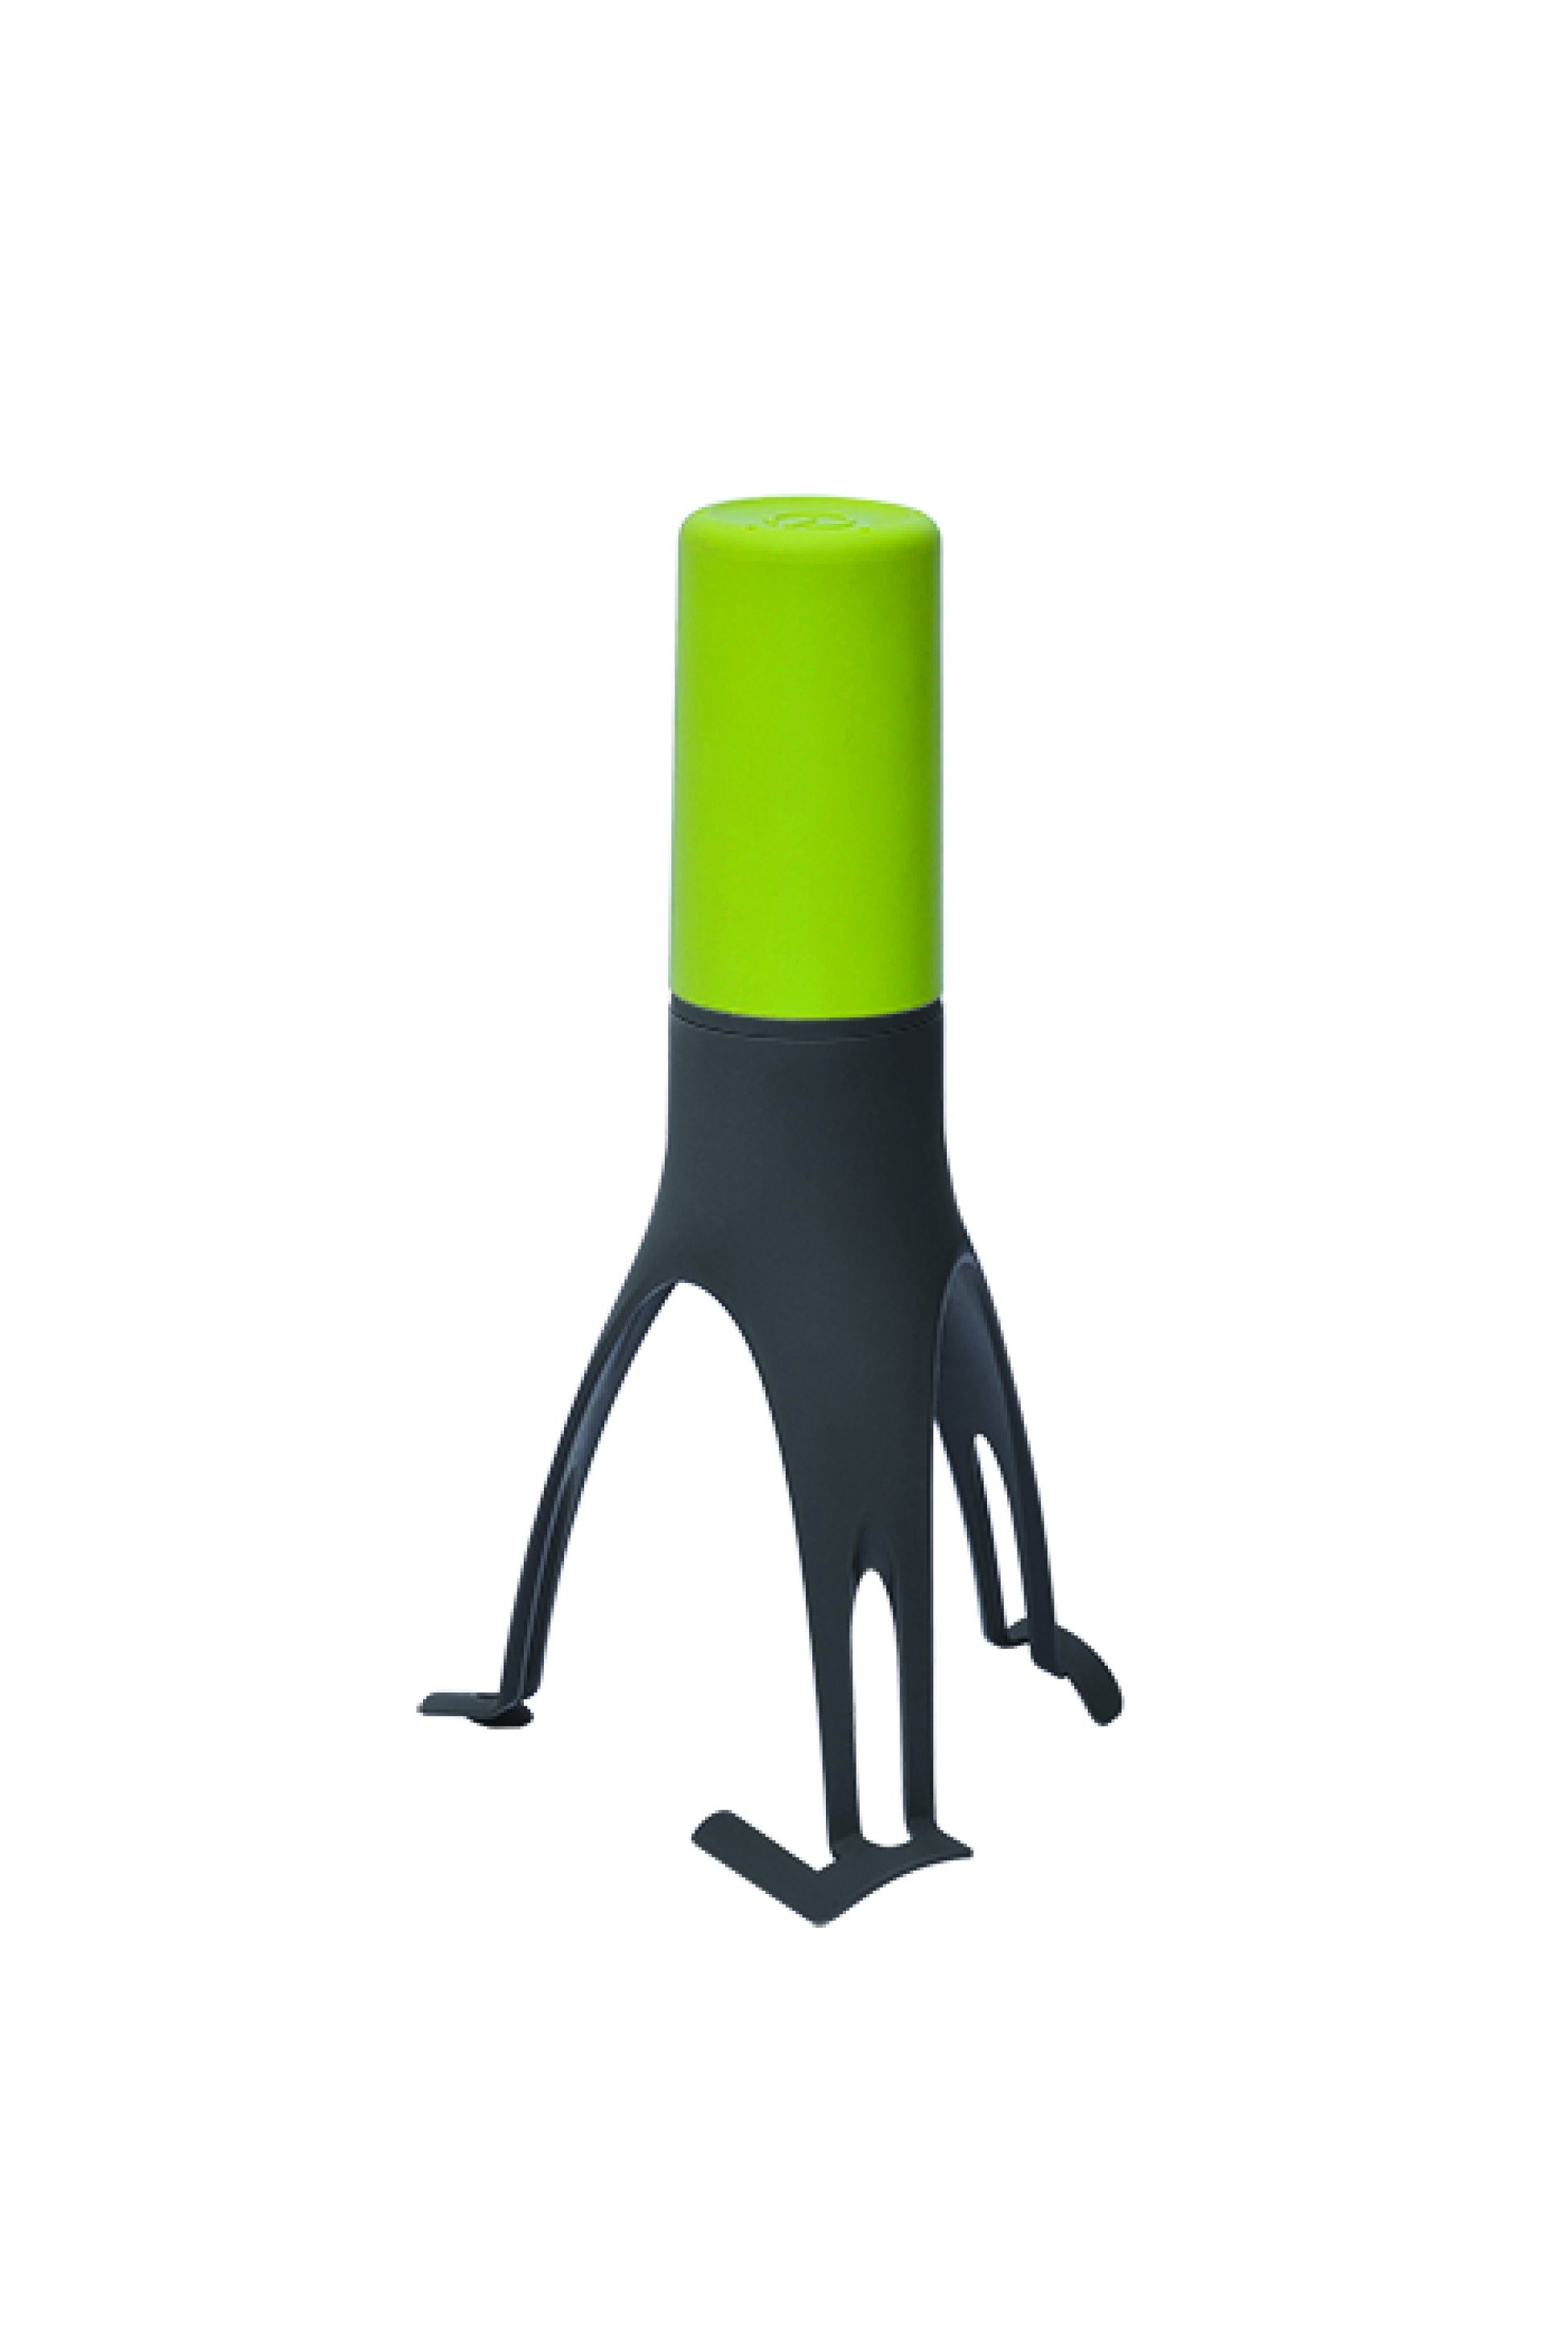 Black kitchen gadget standing upright on three legs, with bright, light green handle at top.